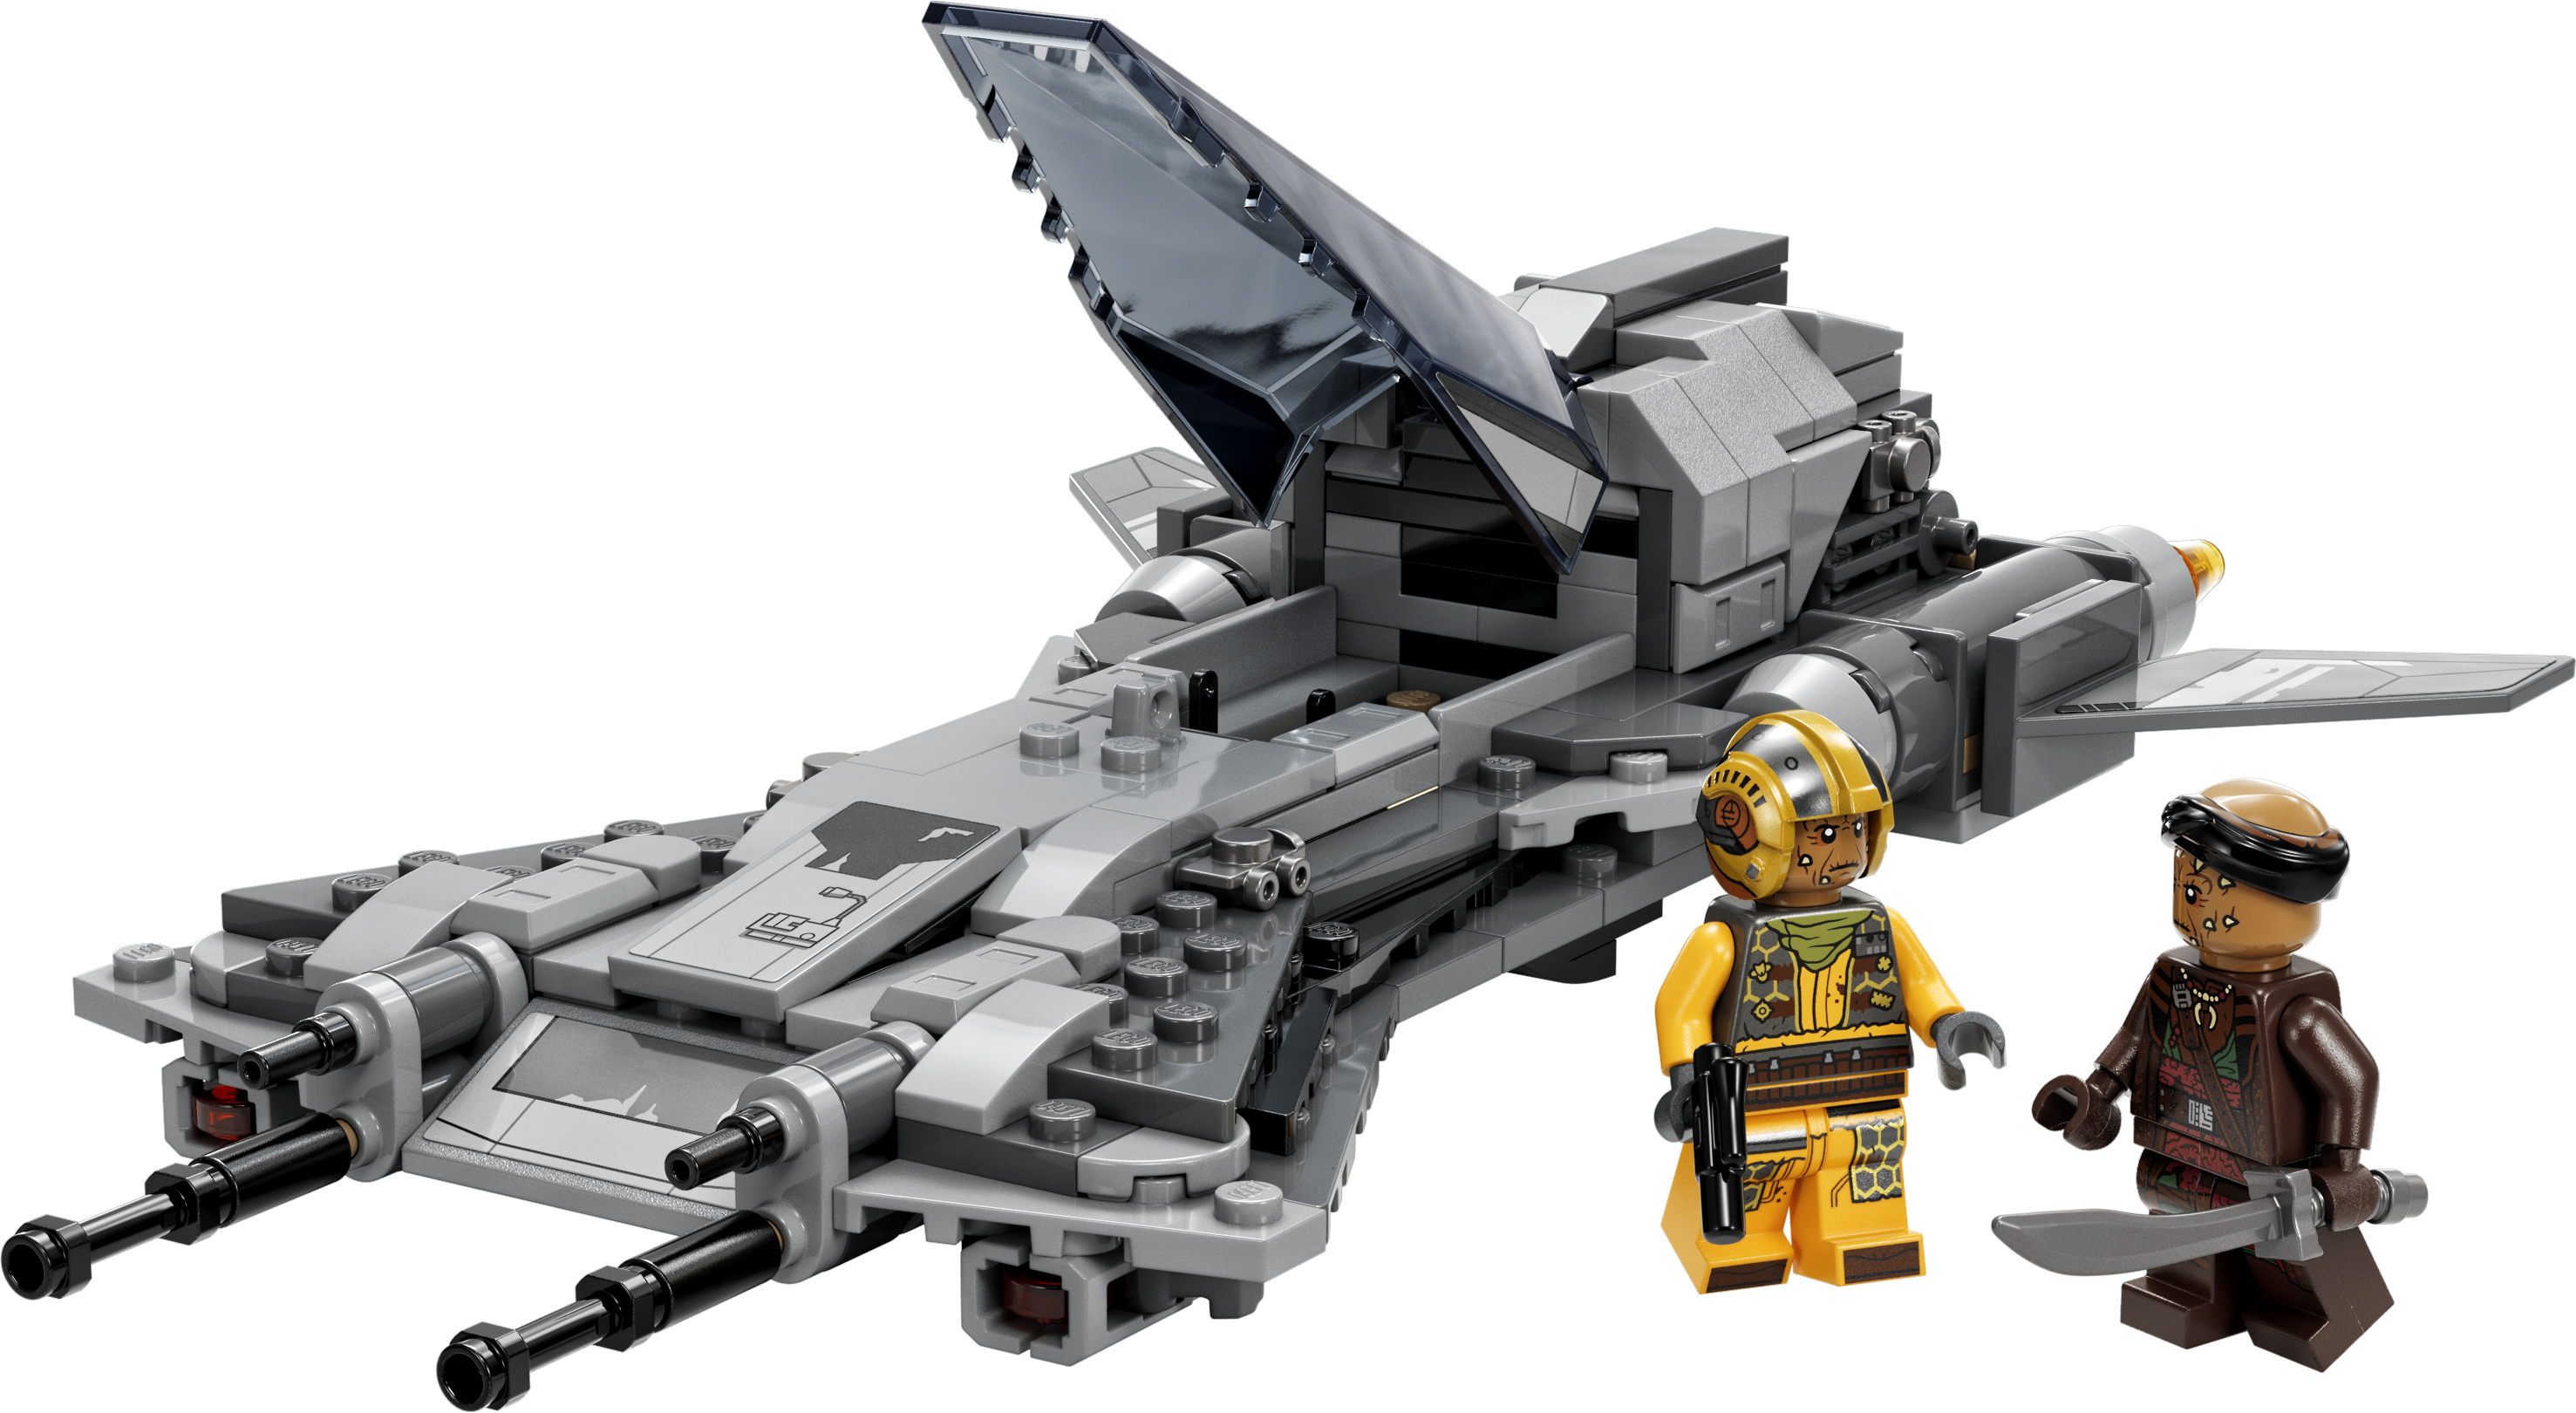 15 Custom Mini Set Star Wars Lego Builds That Will Blow Your Mind